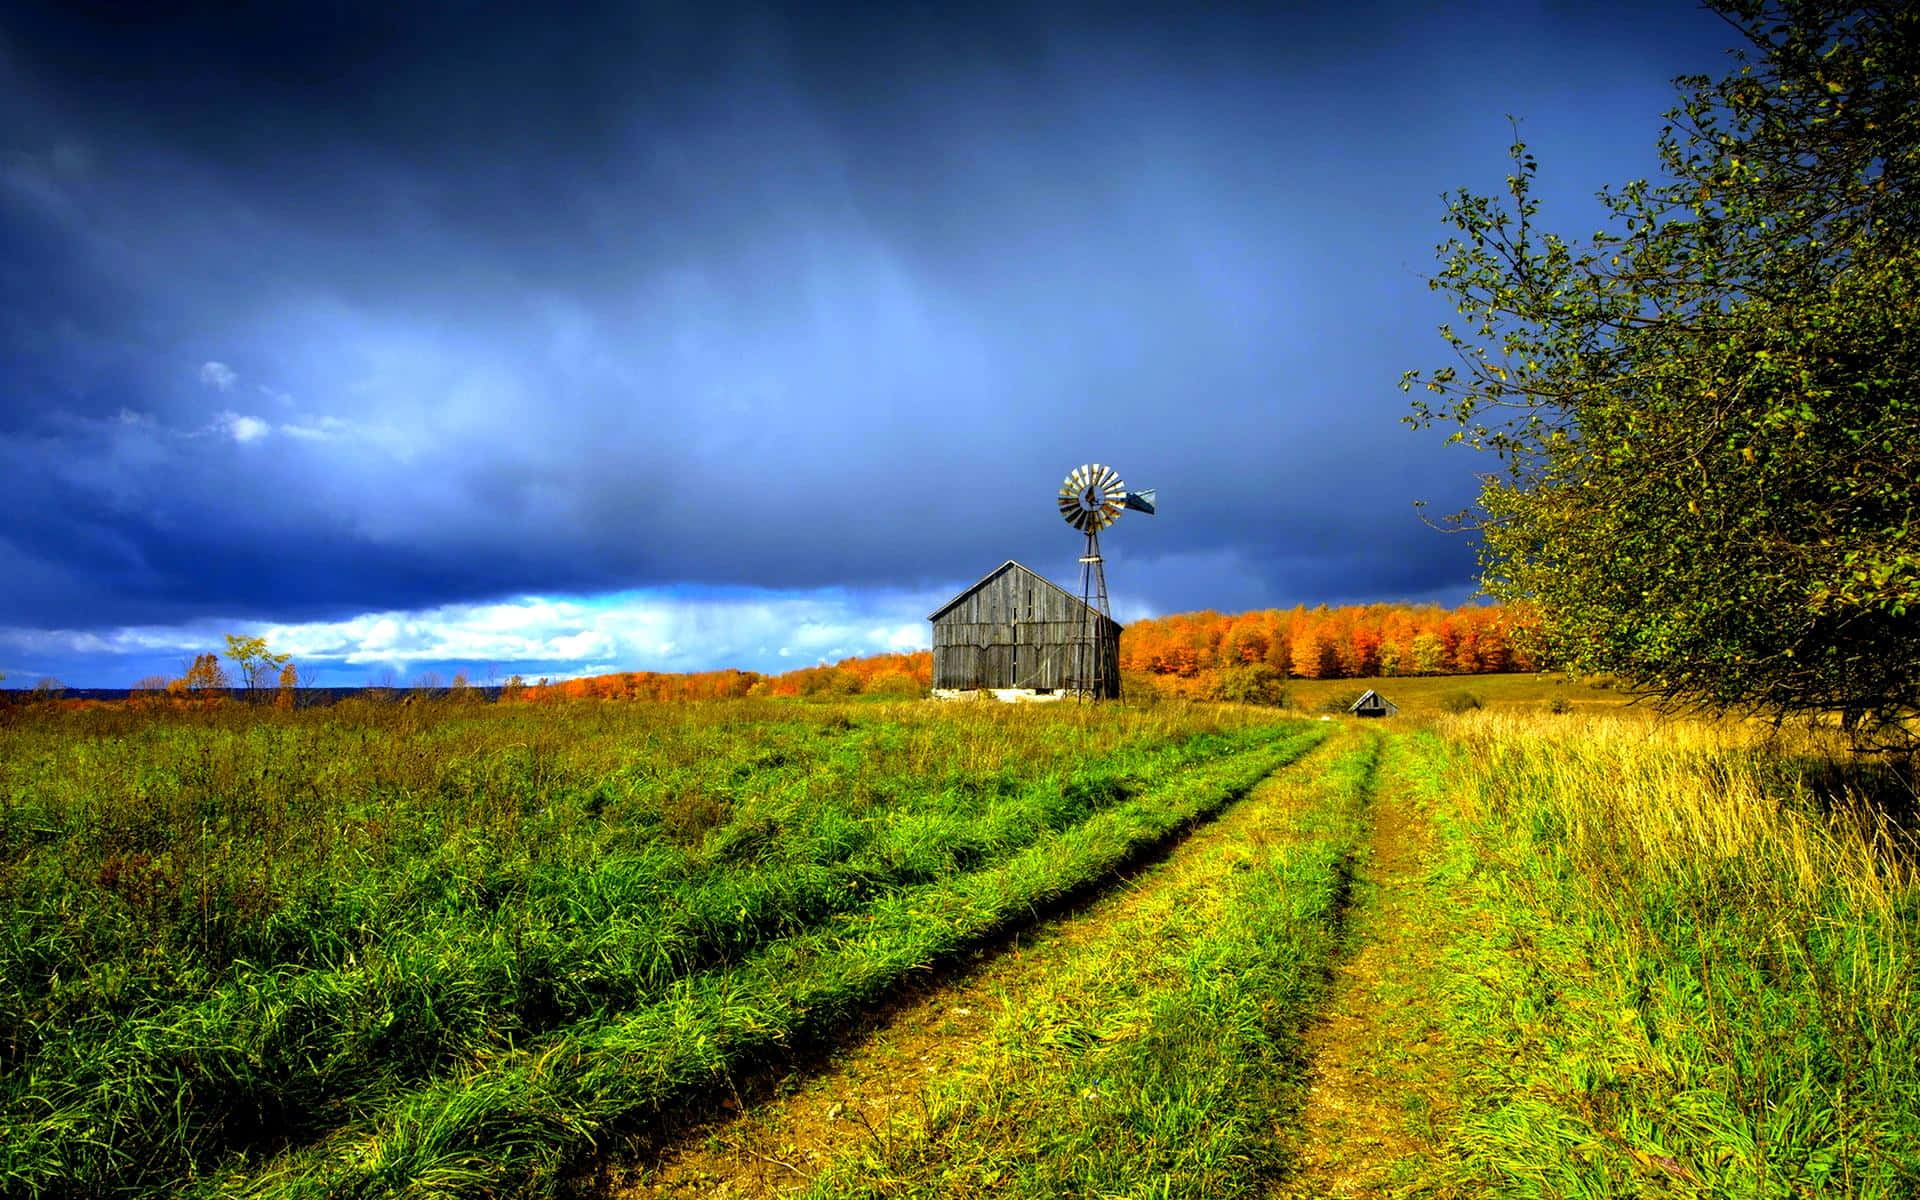 Enjoy the tranquil beauty of a typical rural American landscape